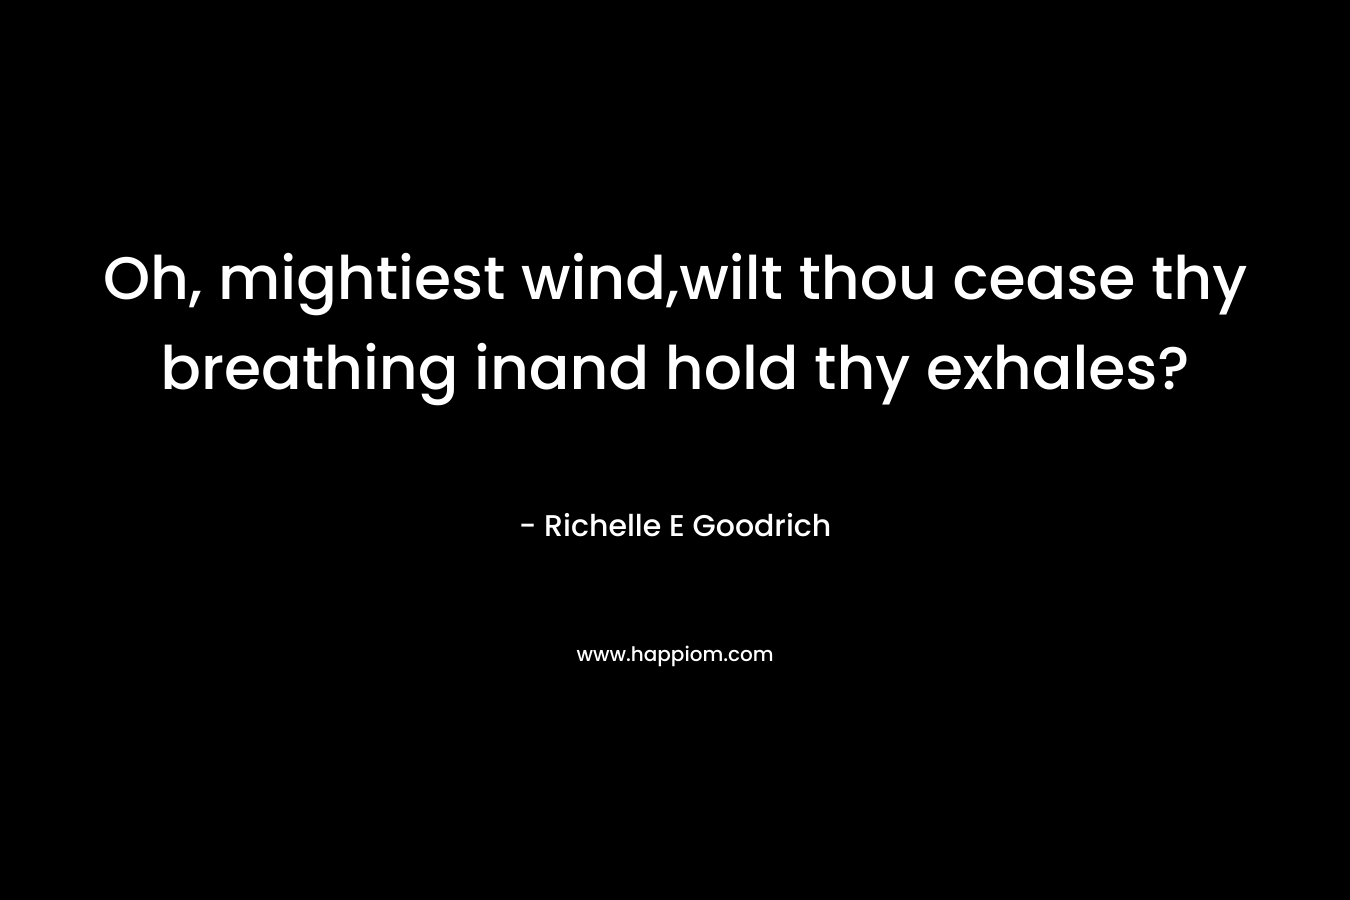 Oh, mightiest wind,wilt thou cease thy breathing inand hold thy exhales?